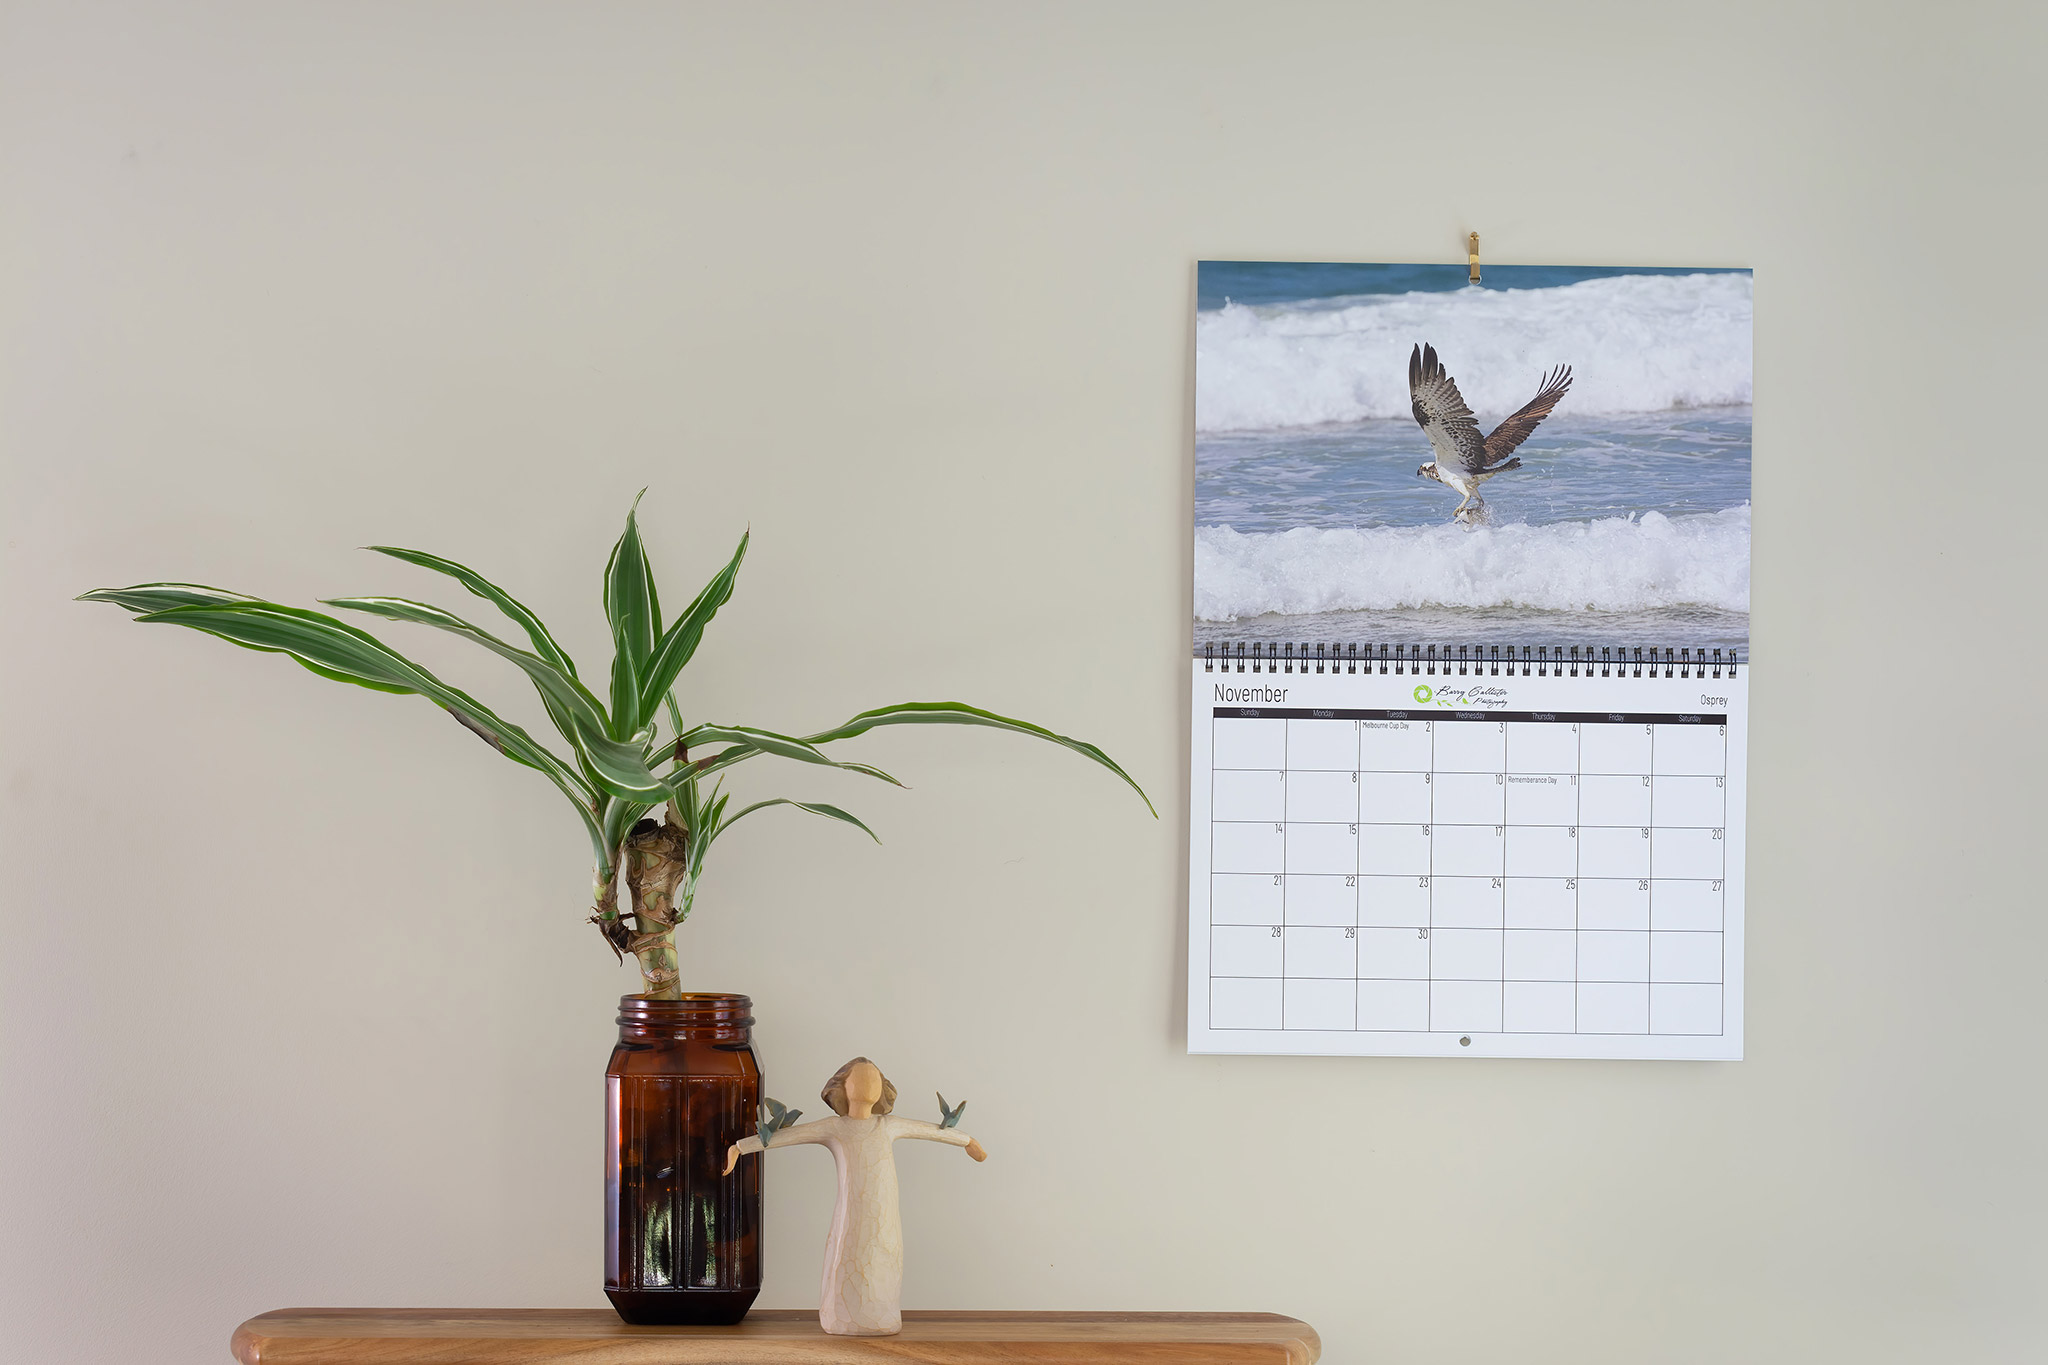 photo of the month September 2020 a calendar hanging on a wall showing a photo of an Osprey catching a fish.  A shelf with a plant in a jar and a small figurine sit to the left of the calendar